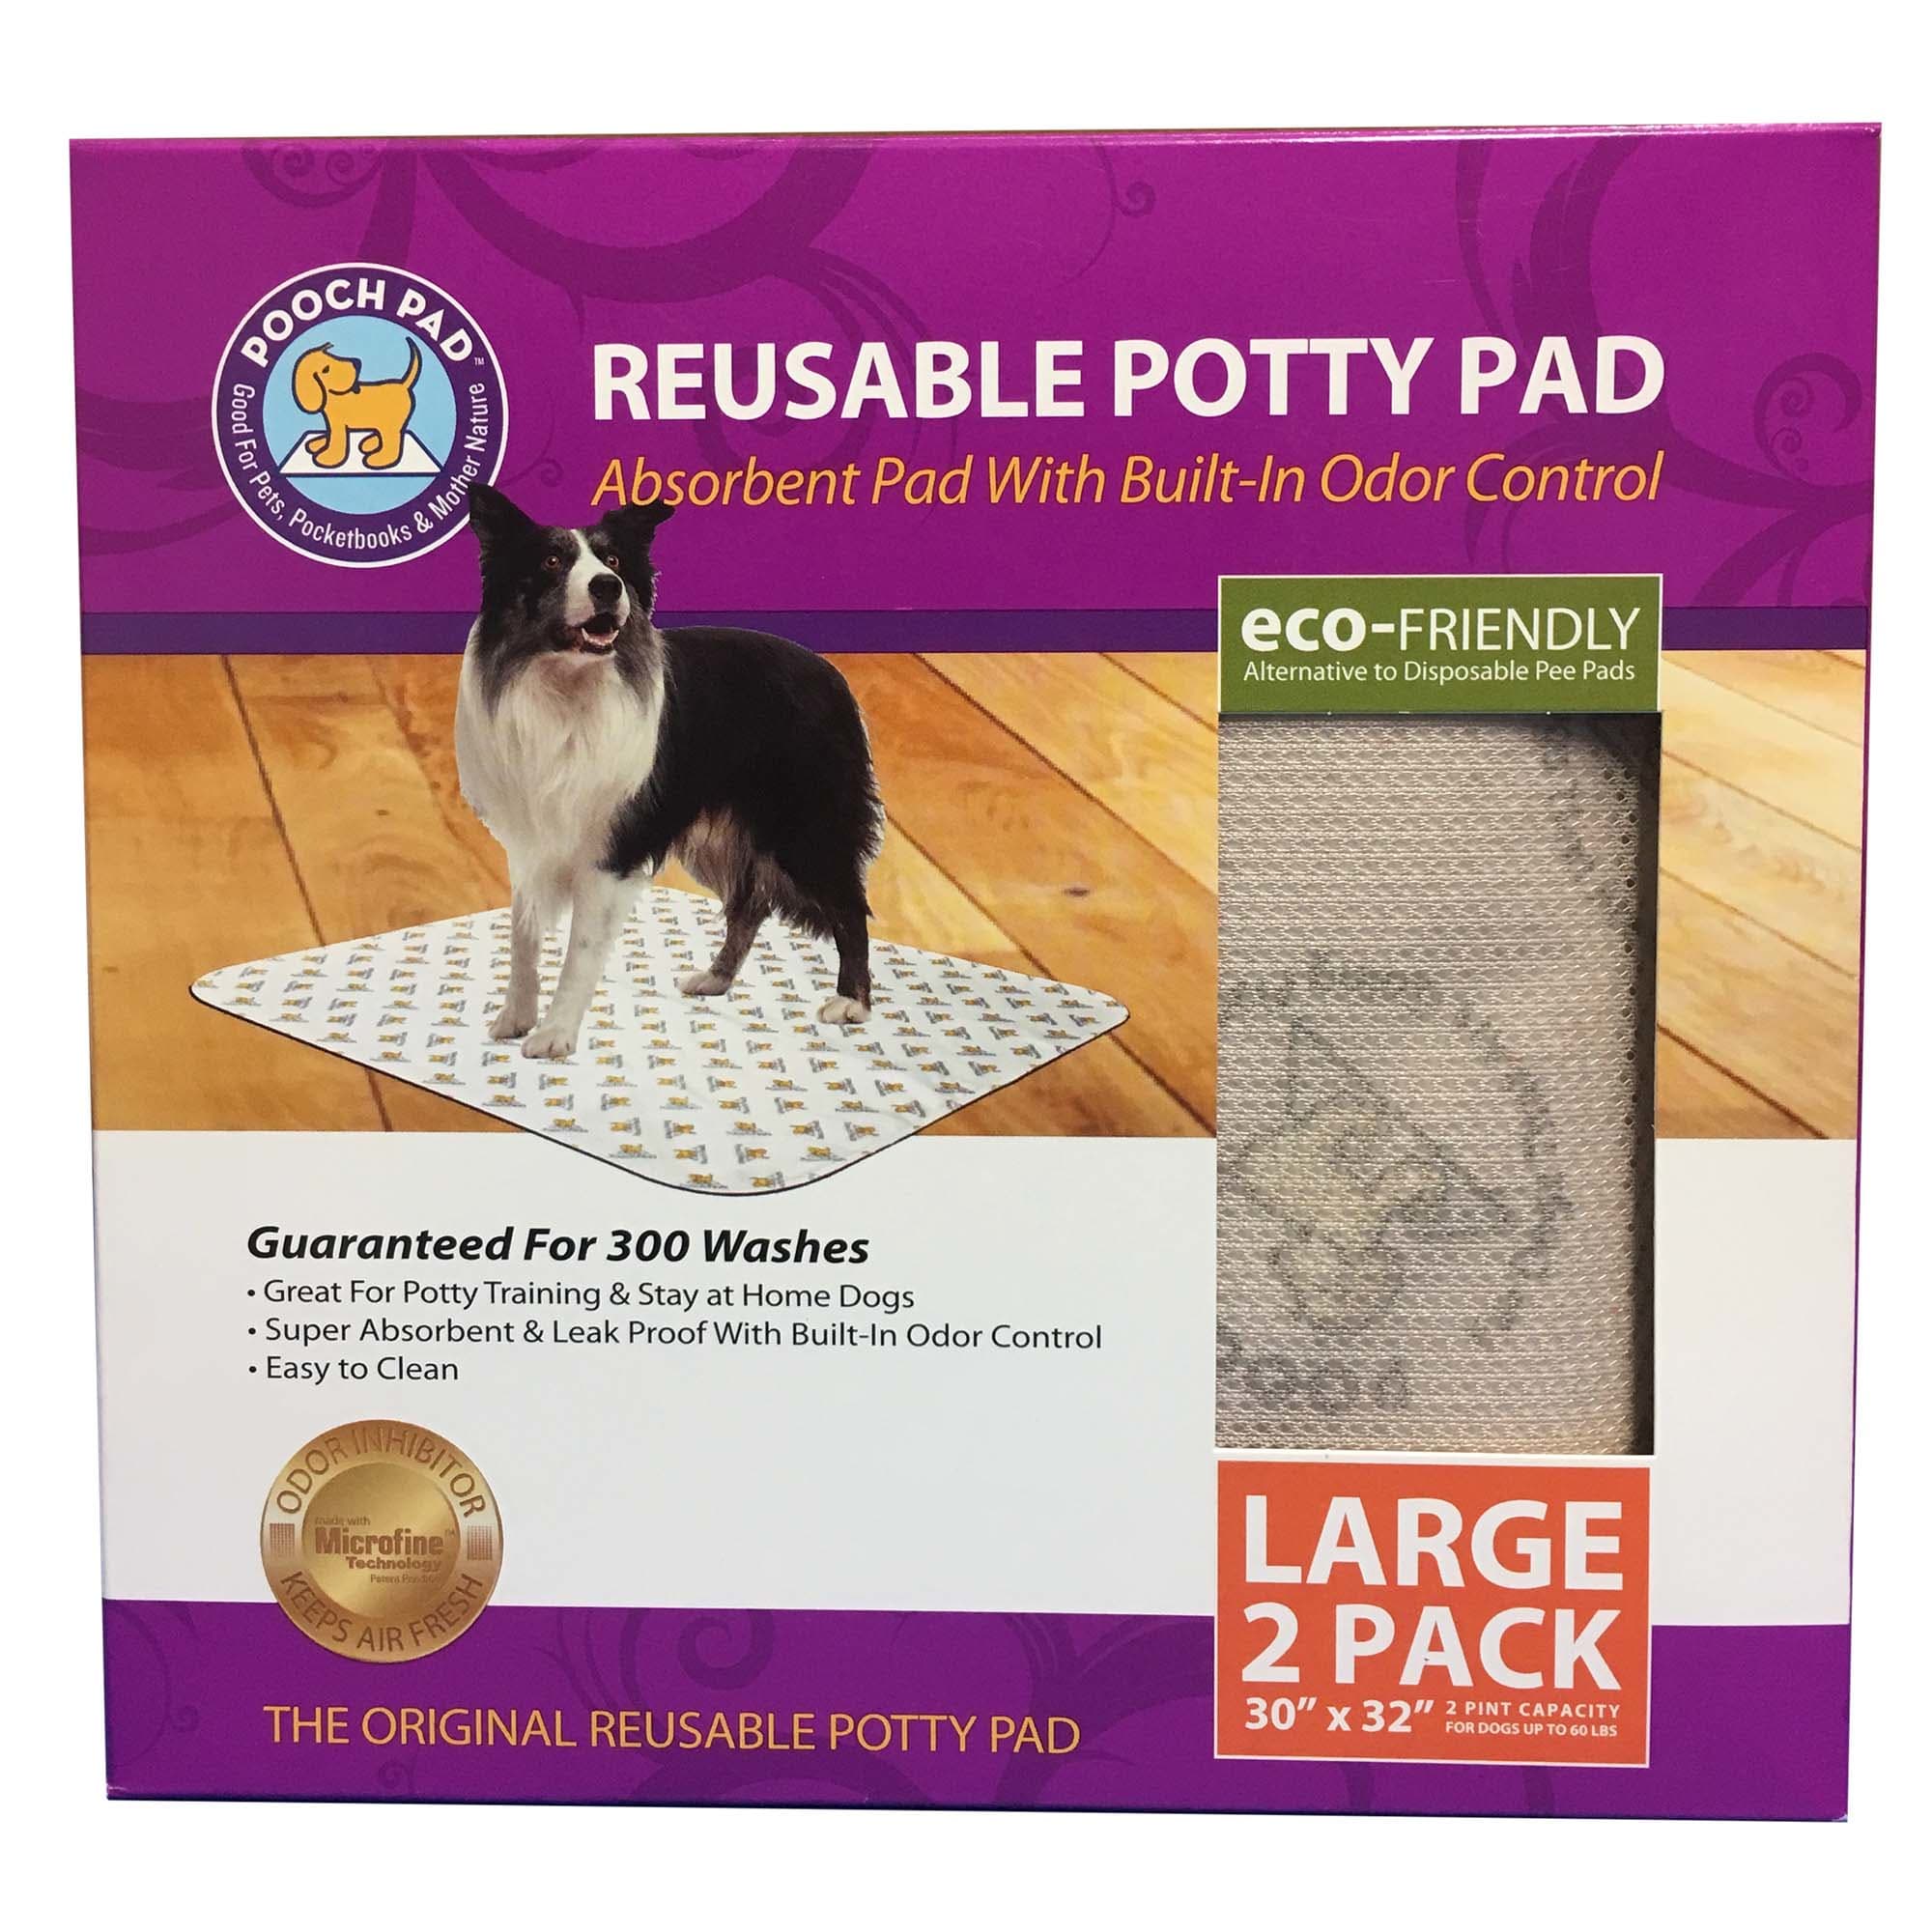 PoochPad® Reusable Extra Absorbent Potty Pad Large 30 x 32 2-Pack